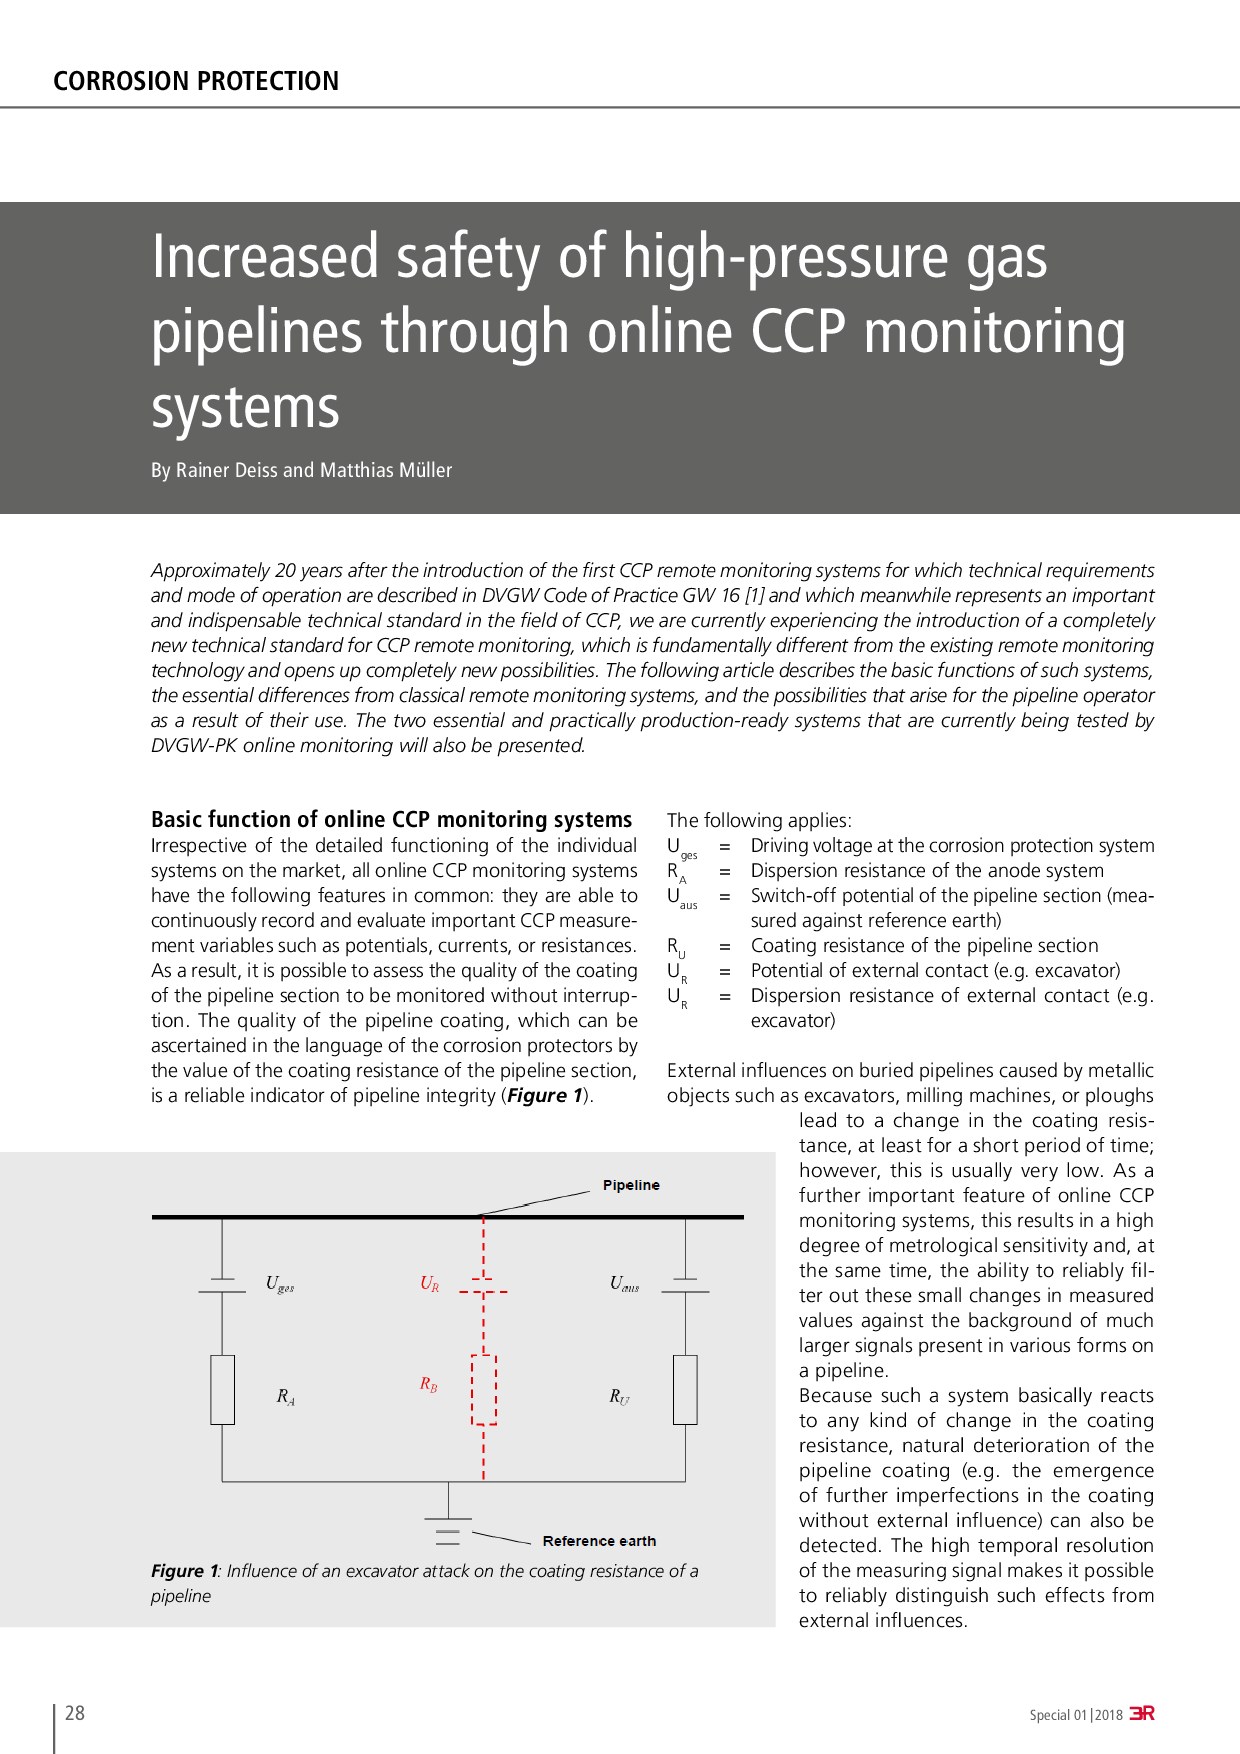 Increased safety of high-pressure gas pipelines through online CCP monitoring systems